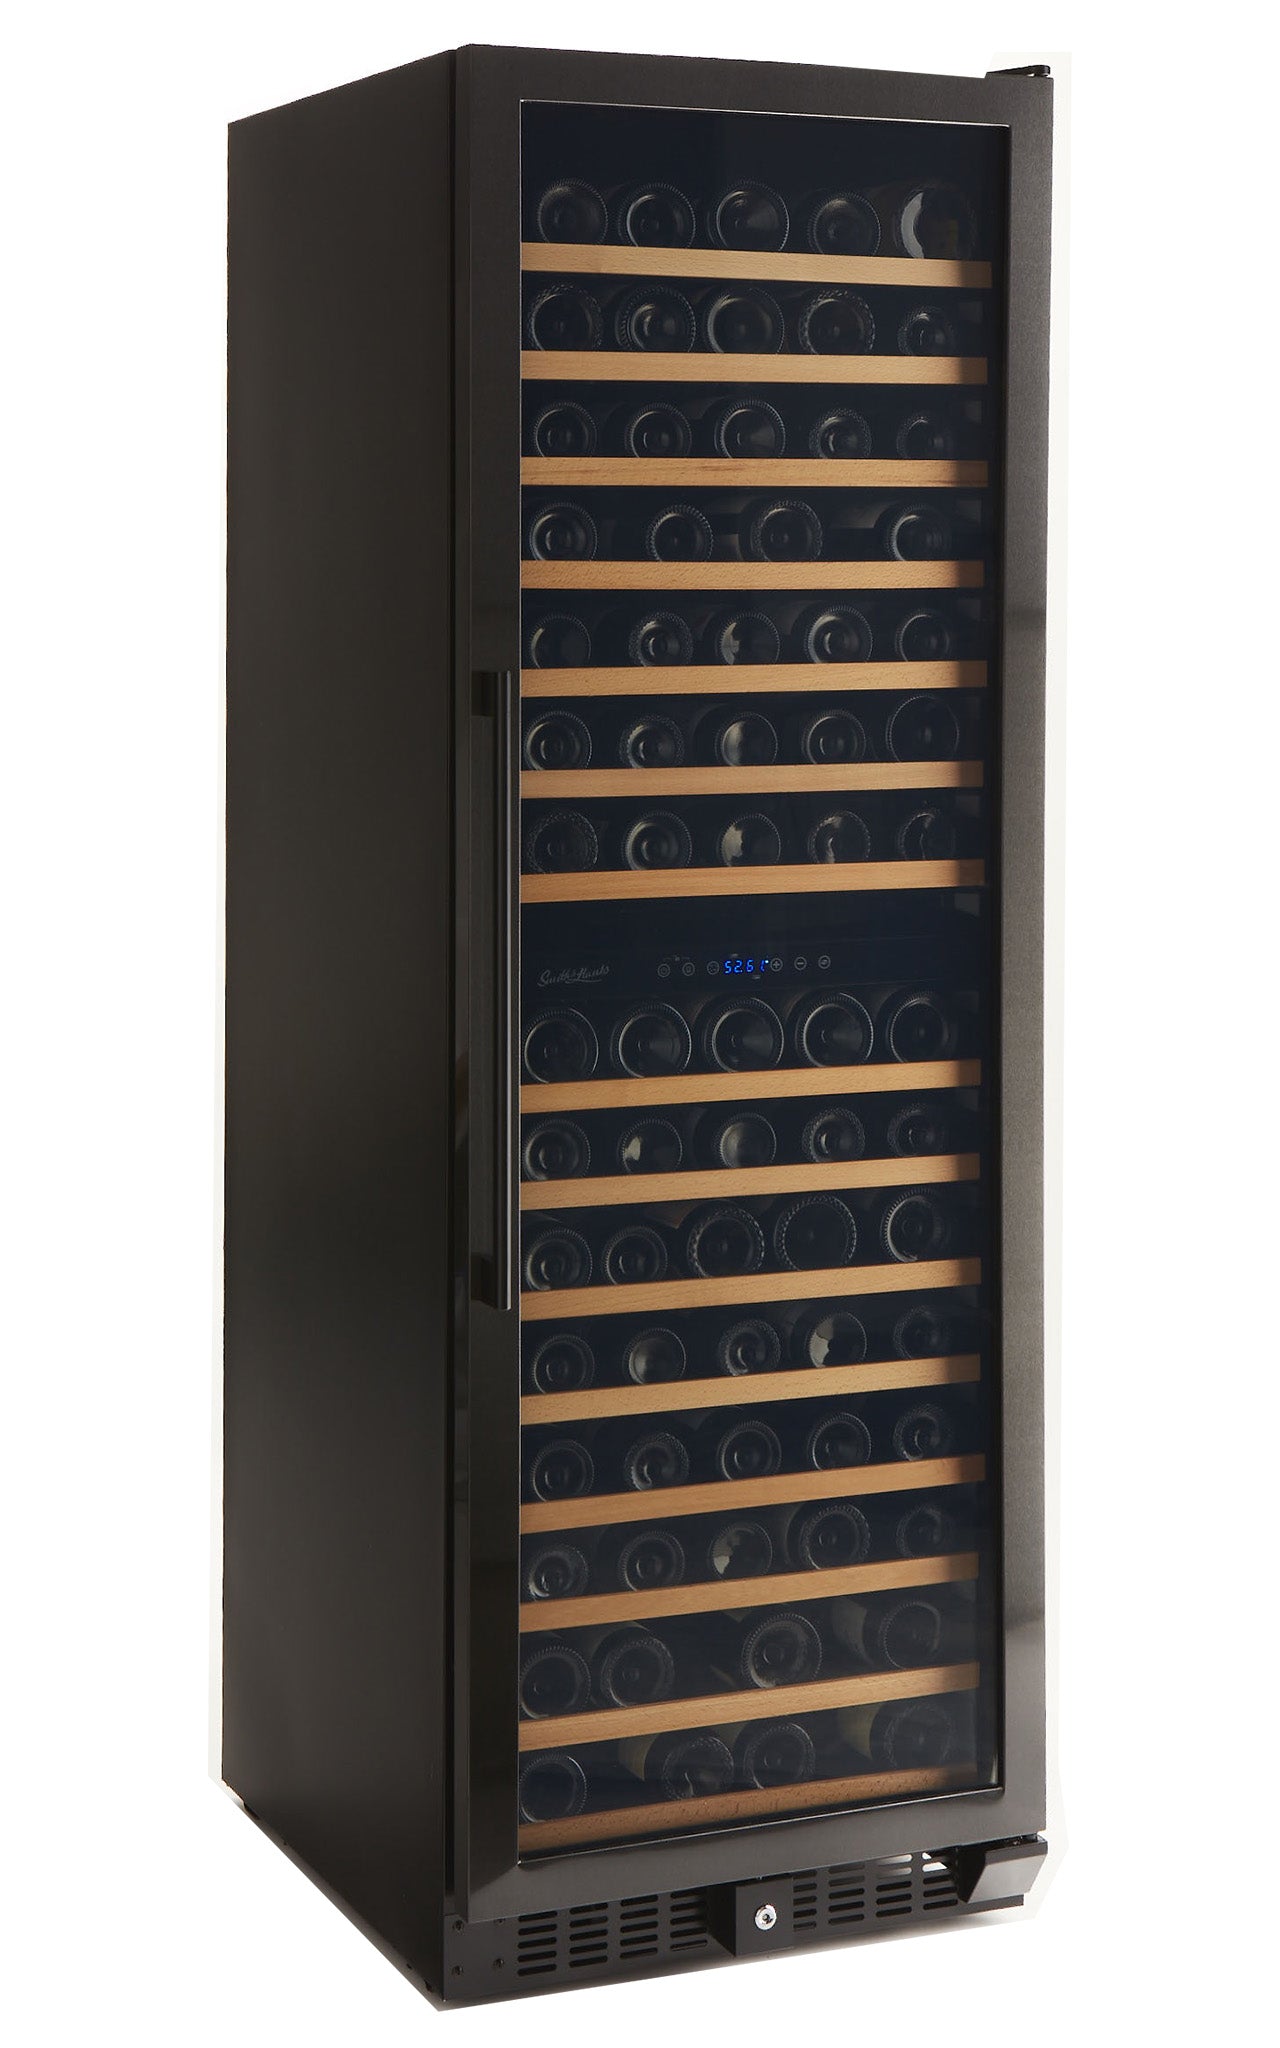 Smith & Hanks - 24" 166 Bottle Dual Zone Black Stainless Steel Wine Cooler (RE55004)